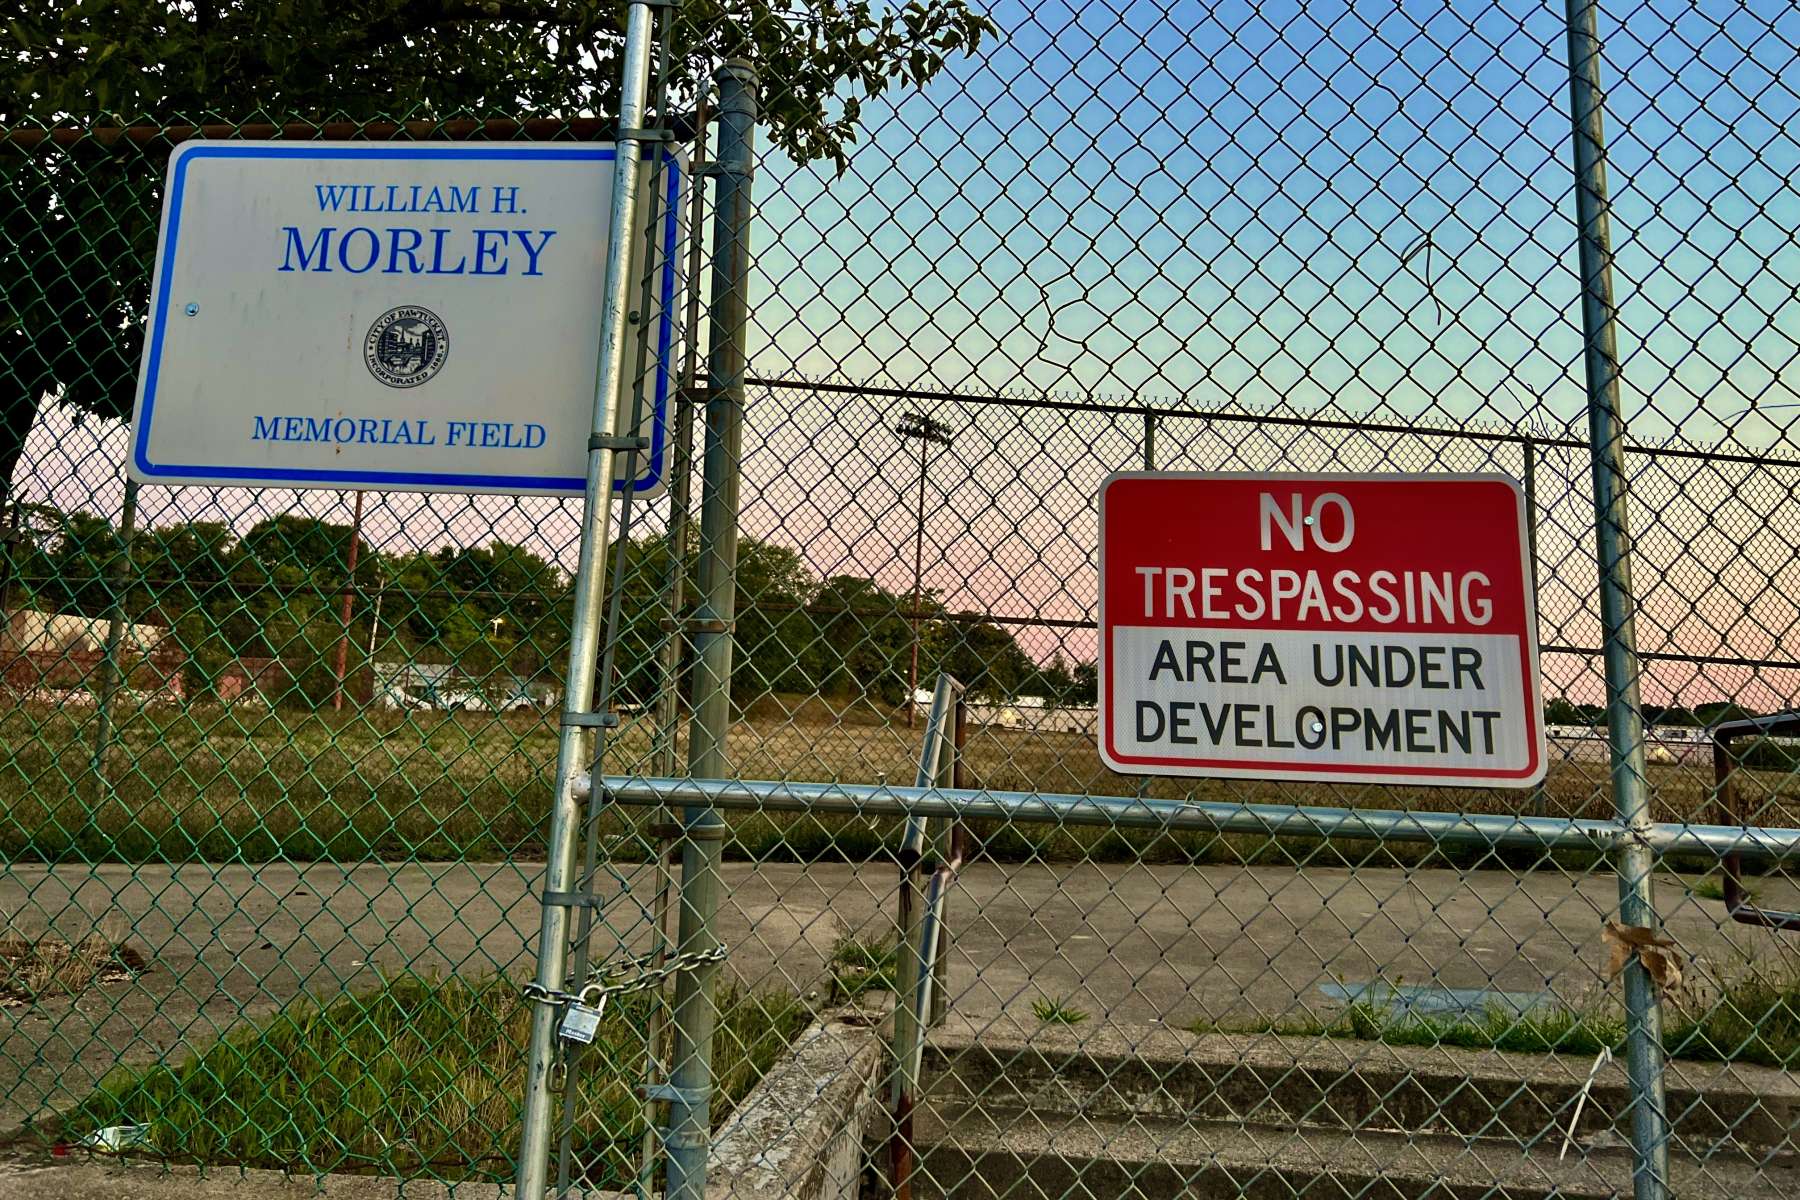 Rhode Island News: New data calls into question the soil testing done at Morley Field by the developer, JK Equity